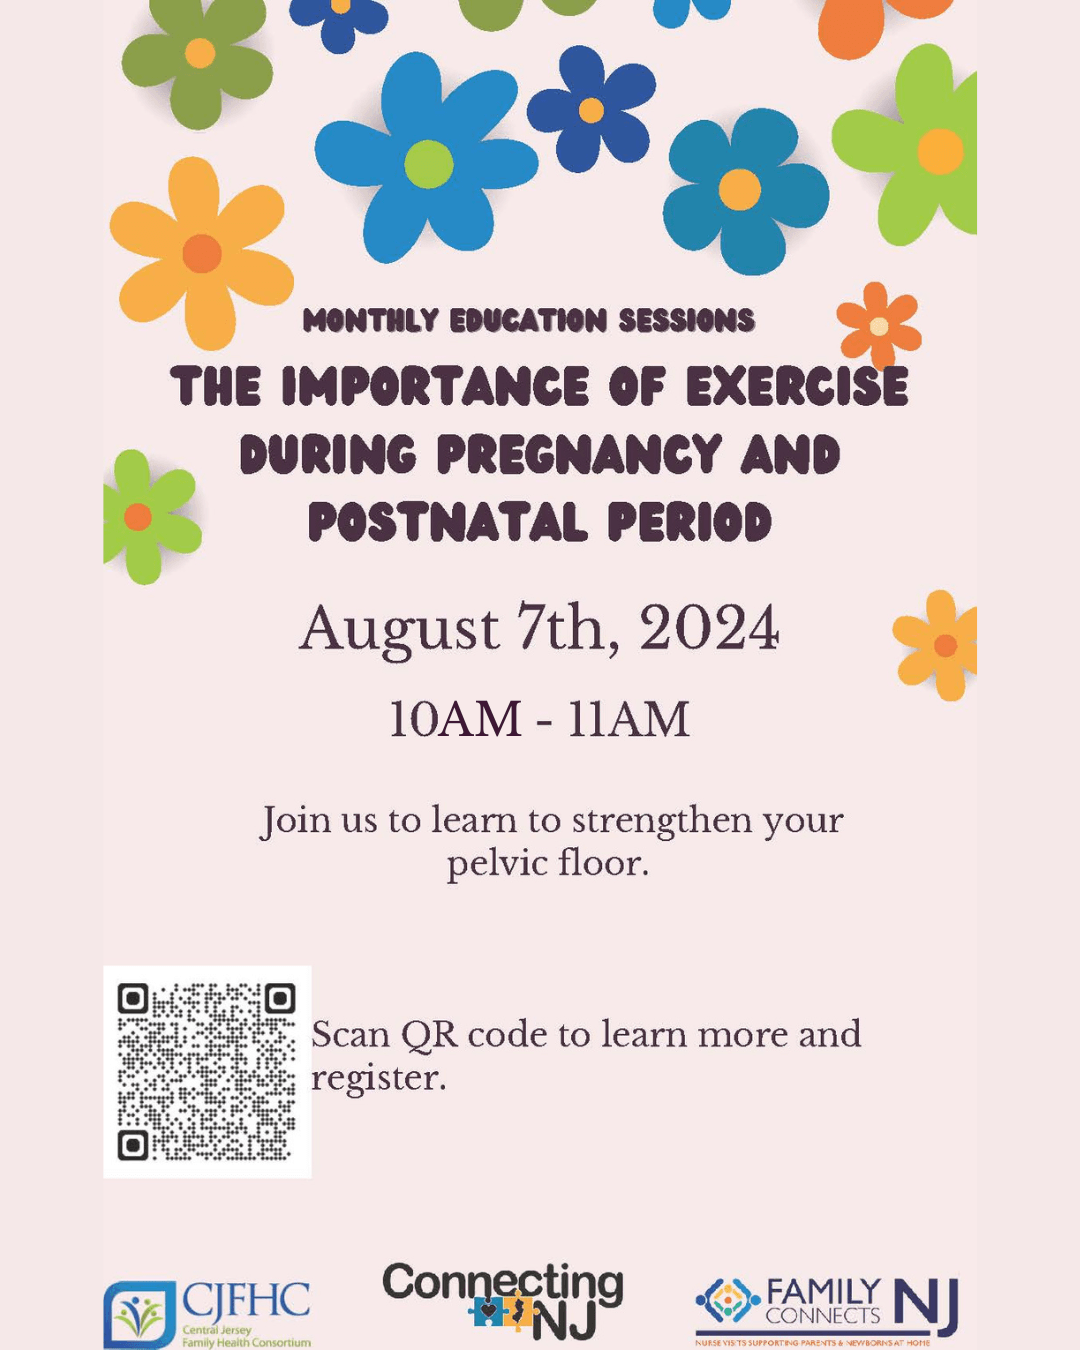 Connecting NJ Free Workshop: The Importance of Exercise During Pregnancy and Postnatal Period